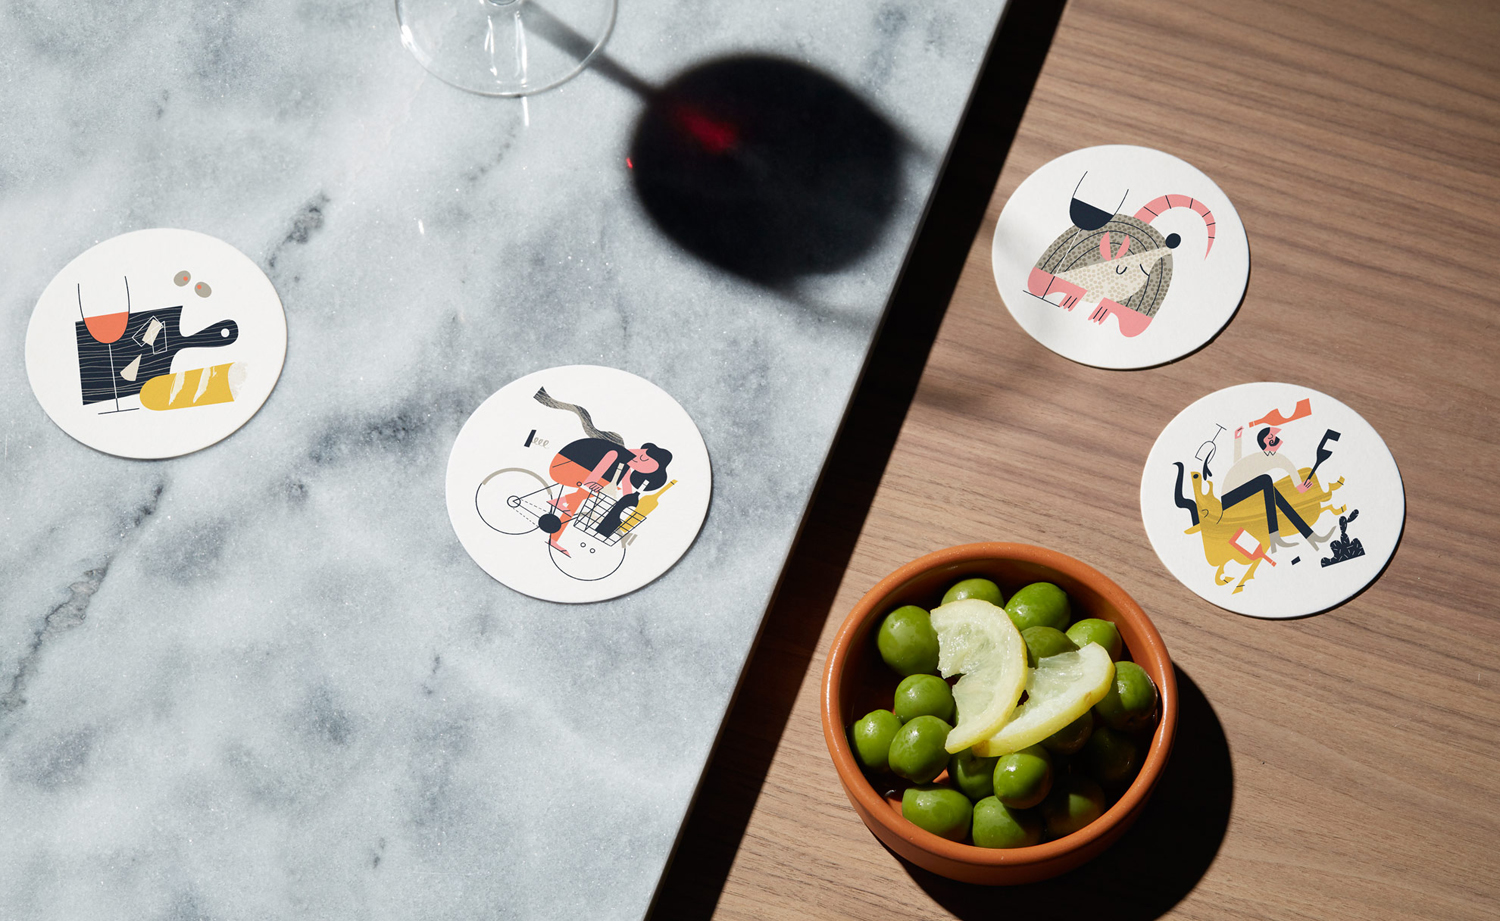 Brand identity and coasters designed by Conductor featuring illustration by Tom Froese for High Street Wine Co, a wine bar and shop located in San Antonio's Pearl neighbourhood